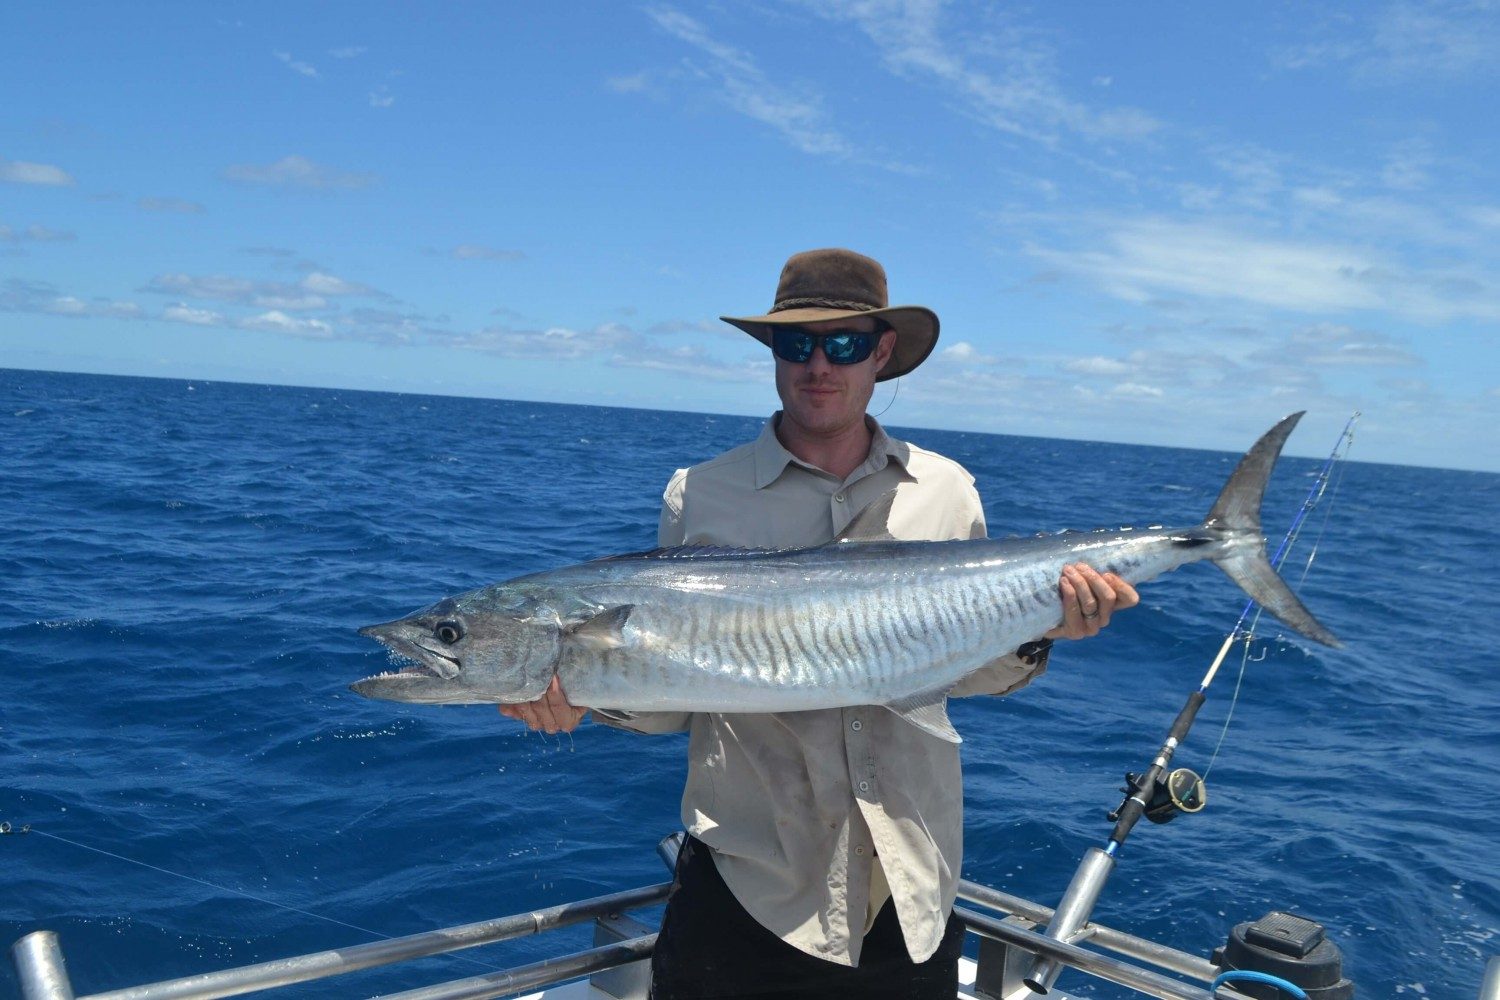 7 reasons to book with Northern Conquest Charters